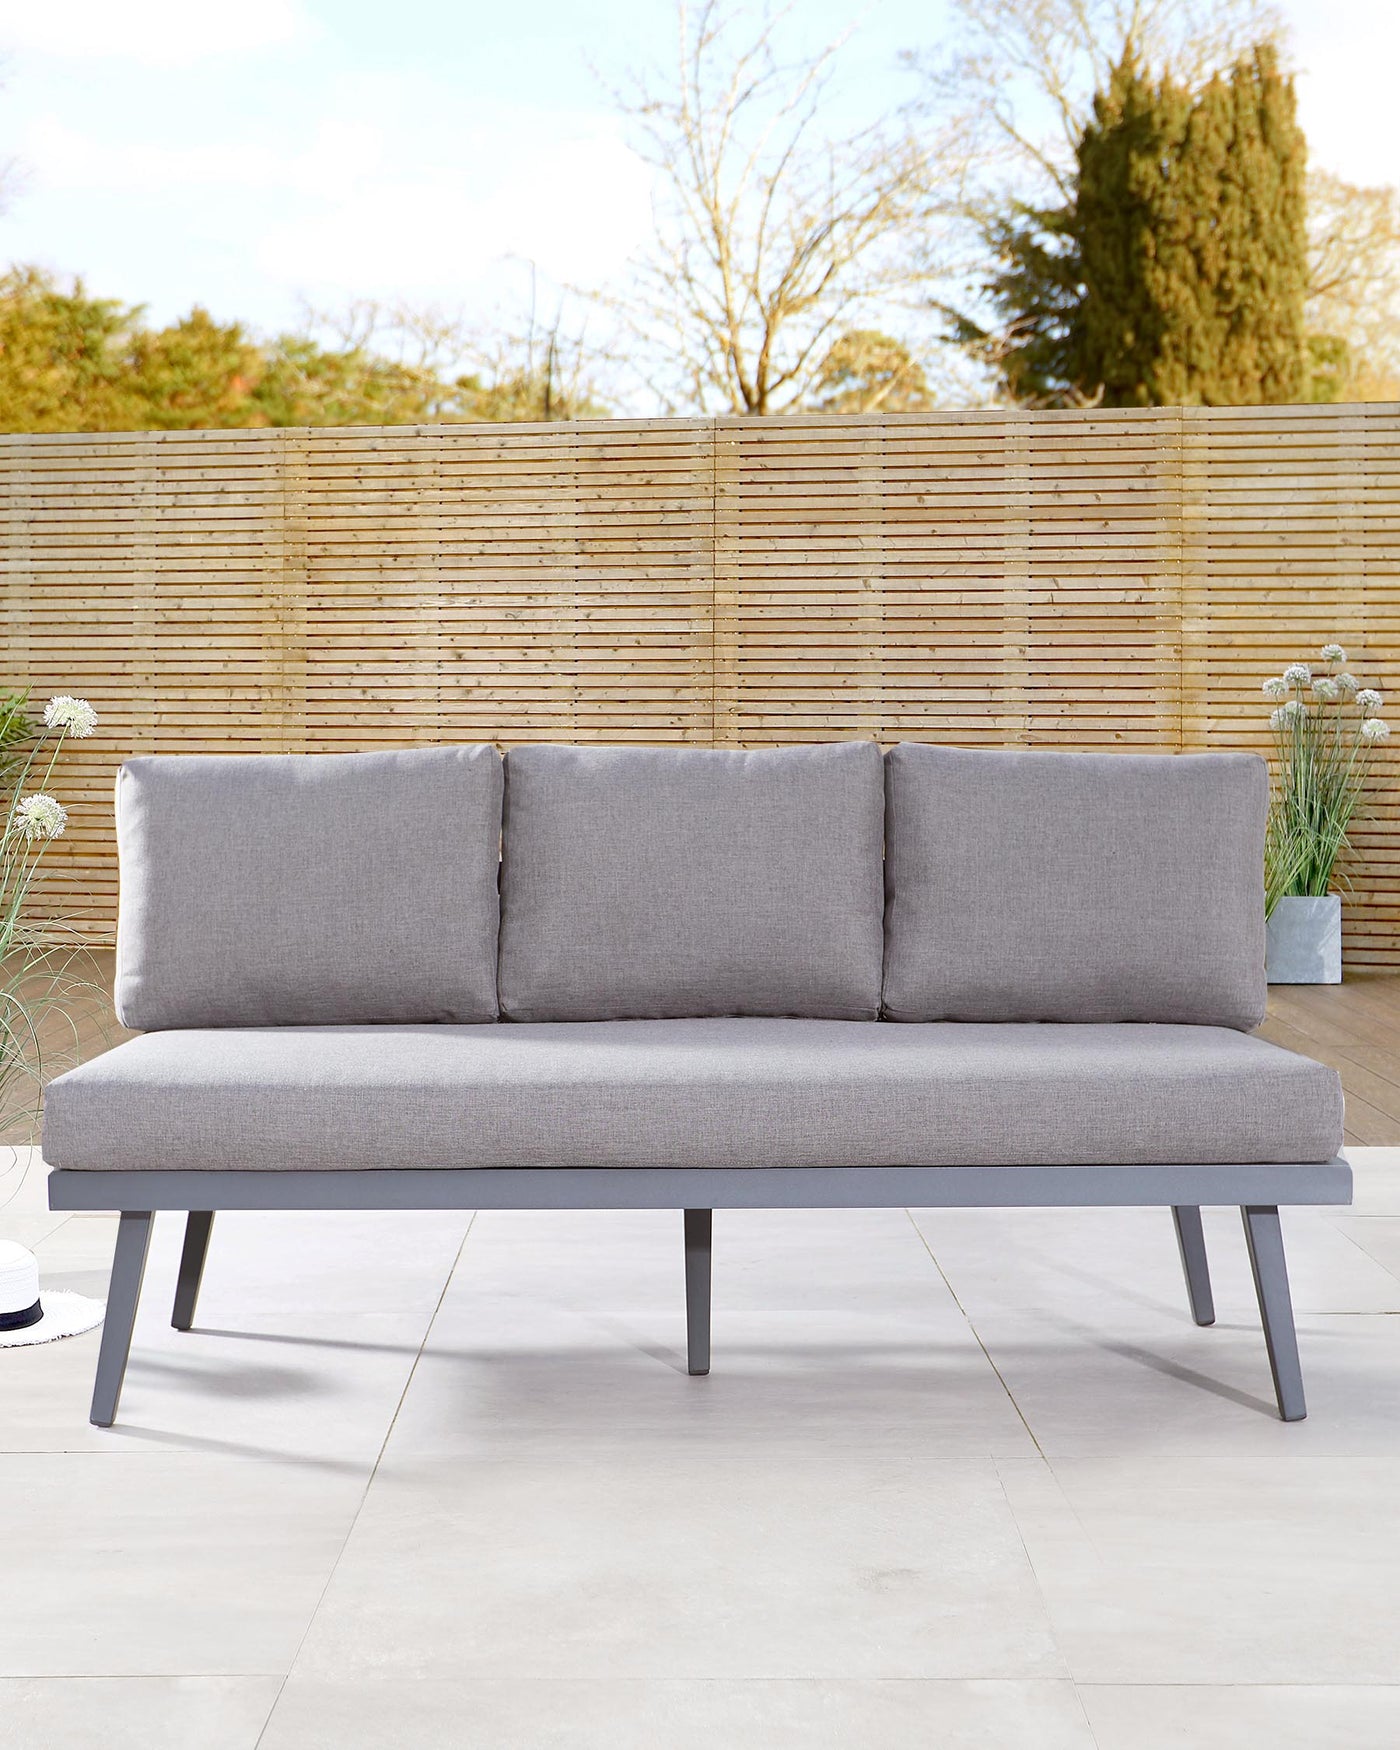 palermo 3 seater outdoor bench with backrest mid grey